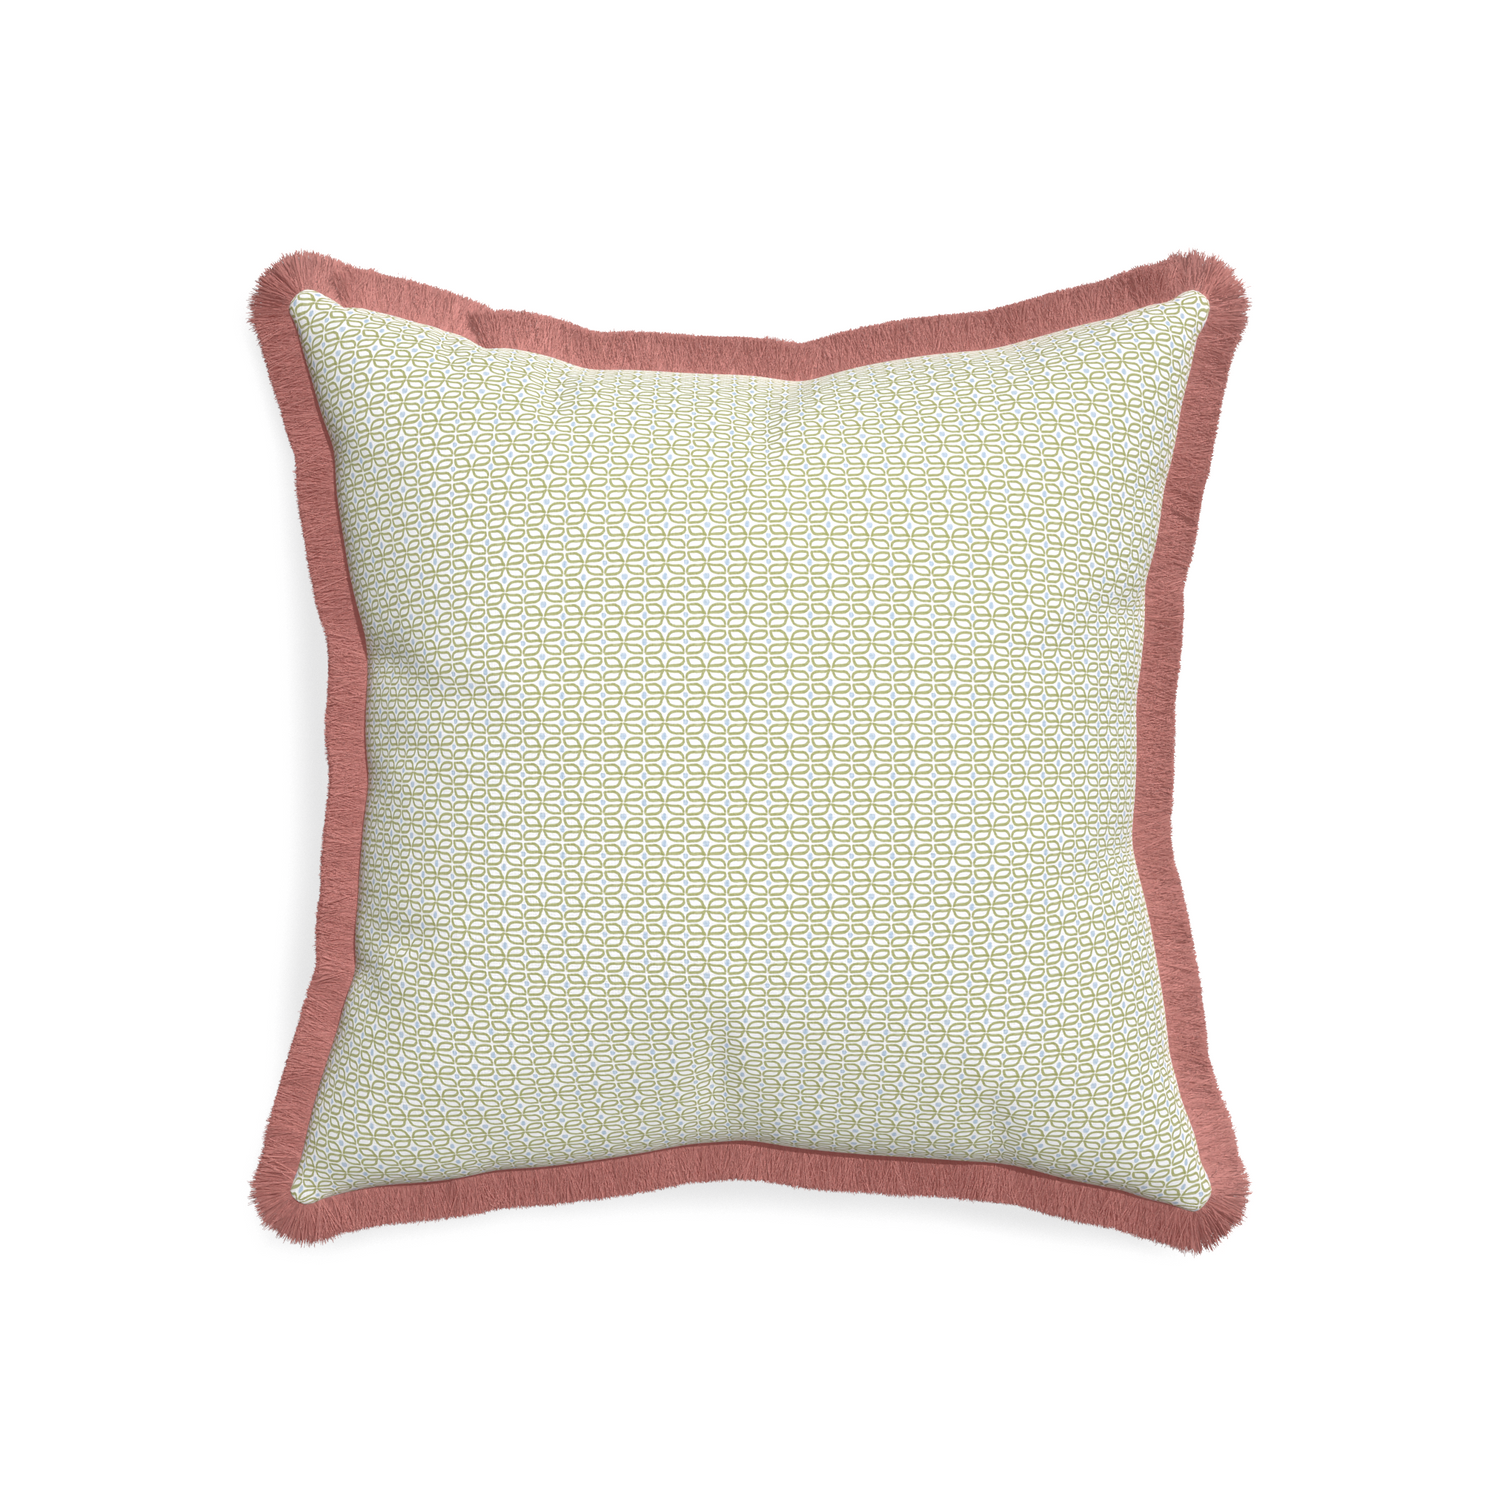 20-square loomi moss custom pillow with d fringe on white background